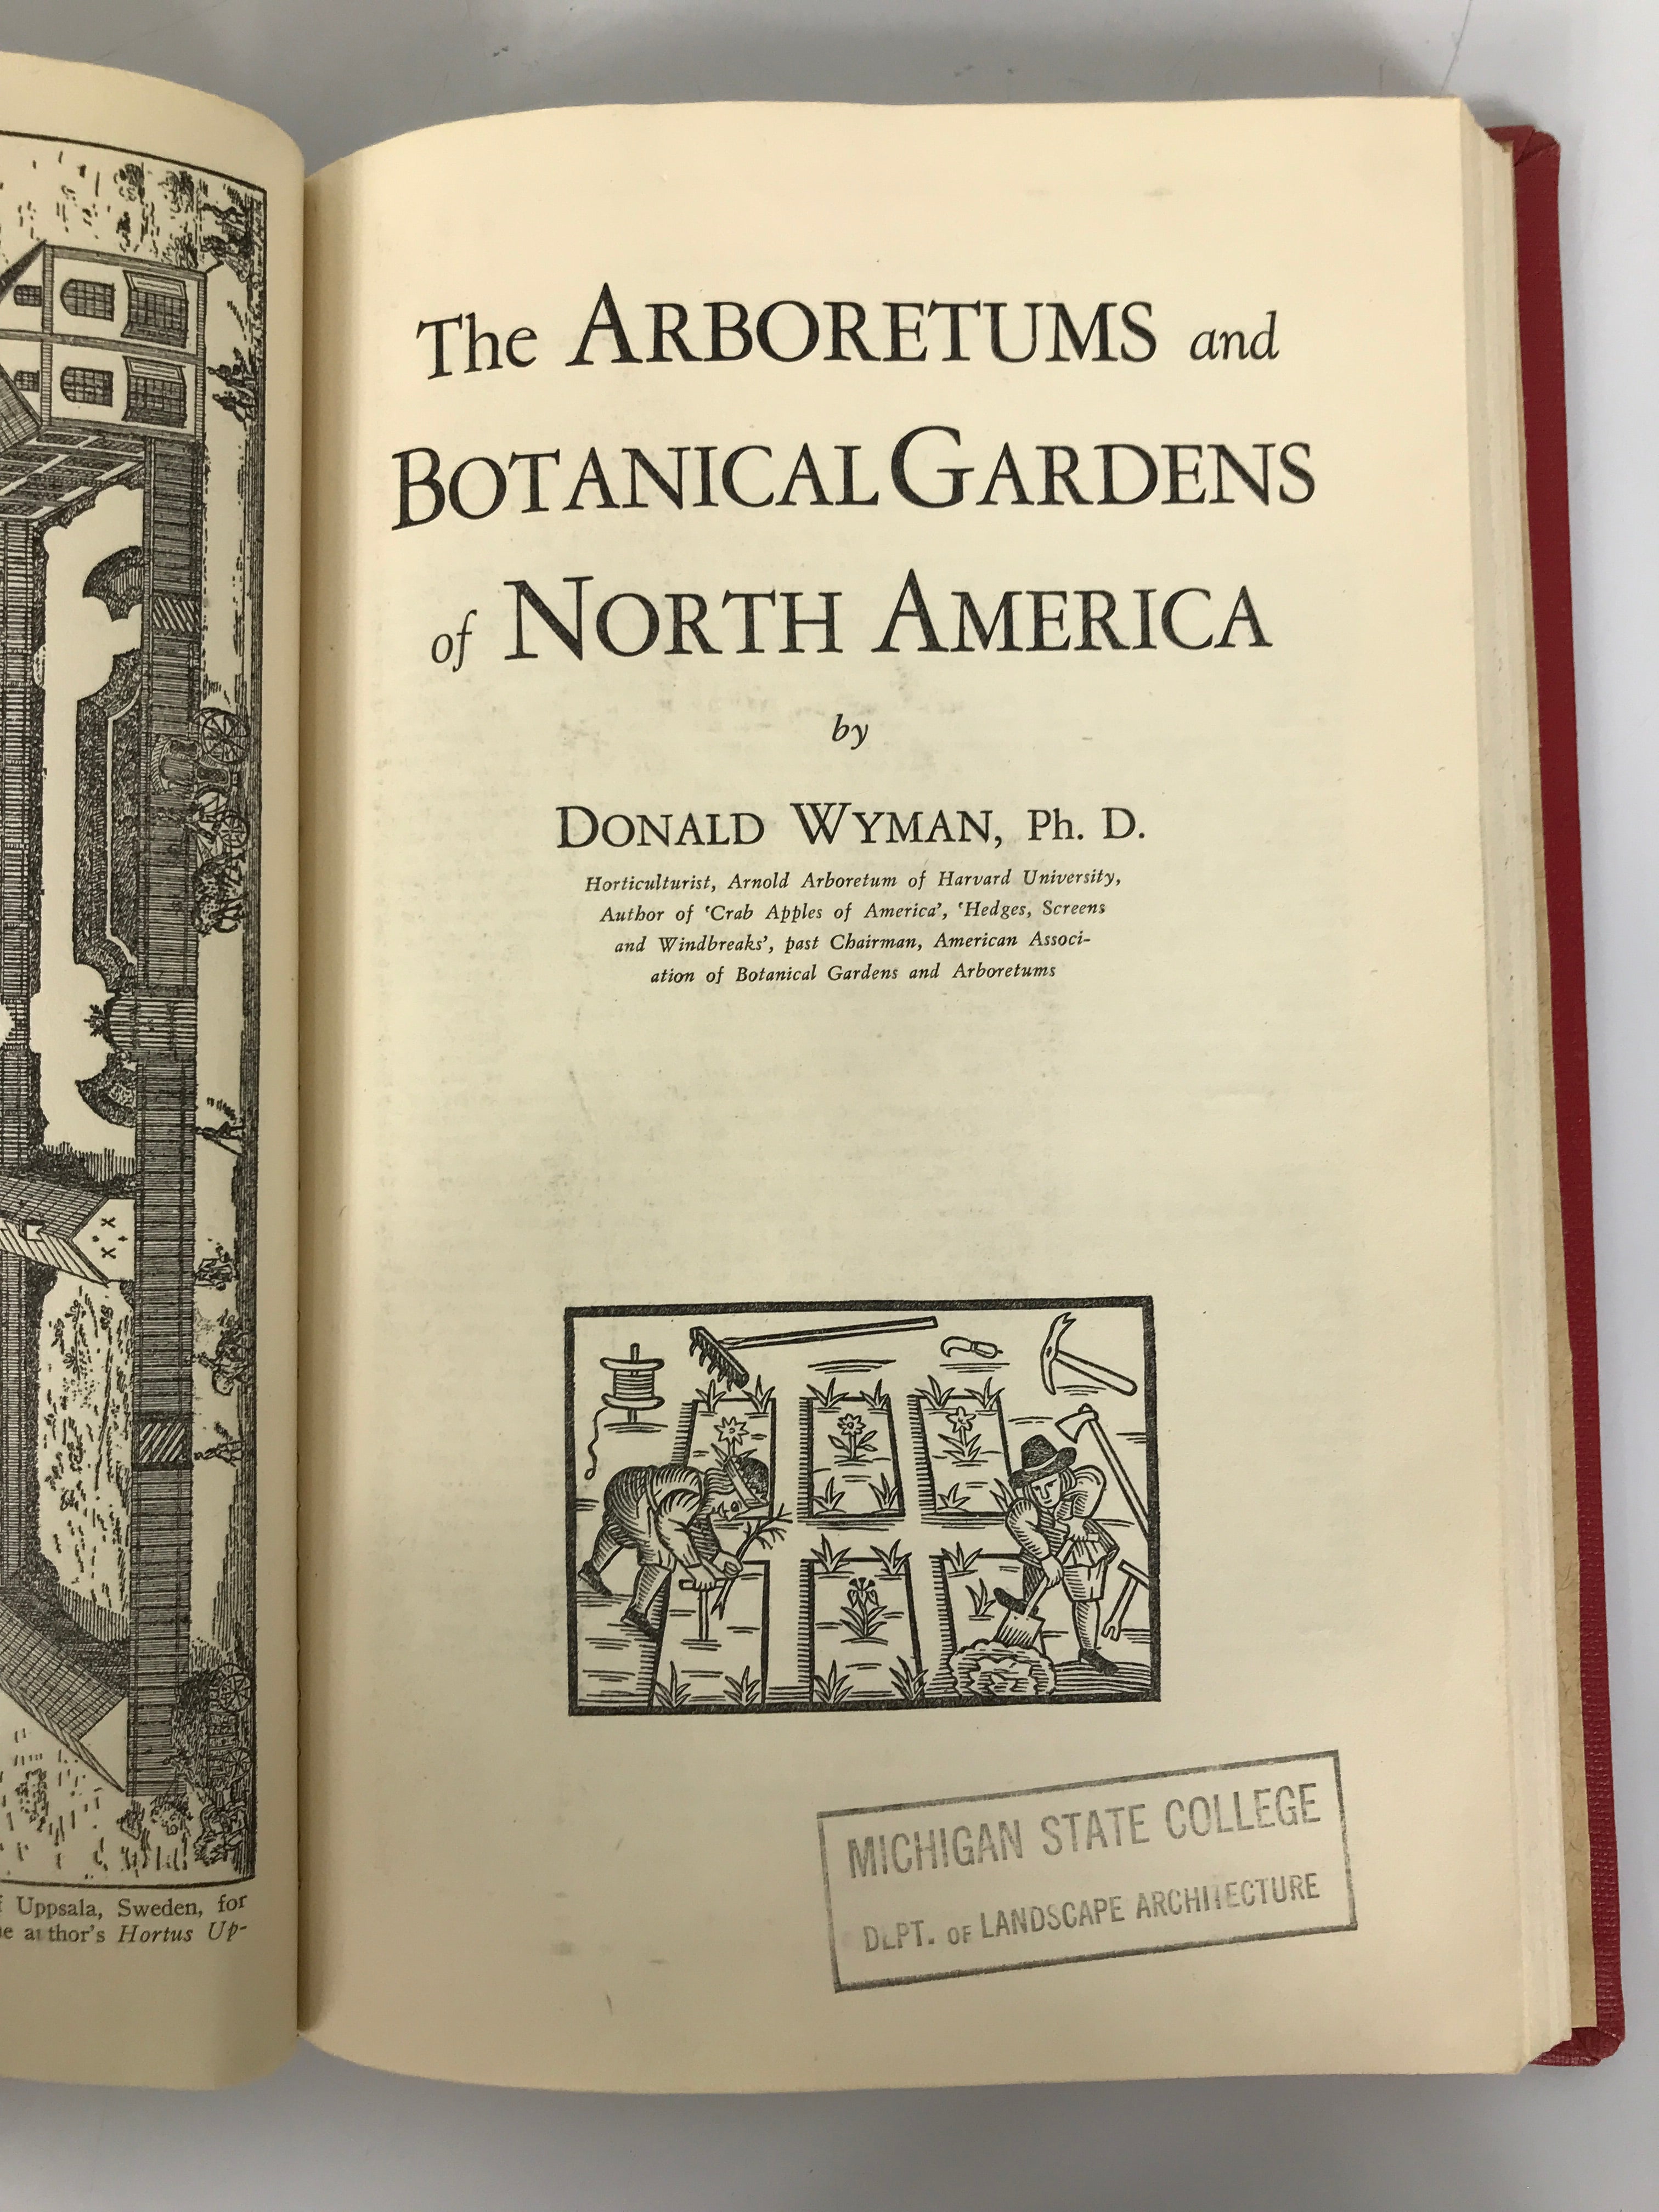 The Arboretums and Botanical Gardens of North America by Donald Wyman 1947 HC